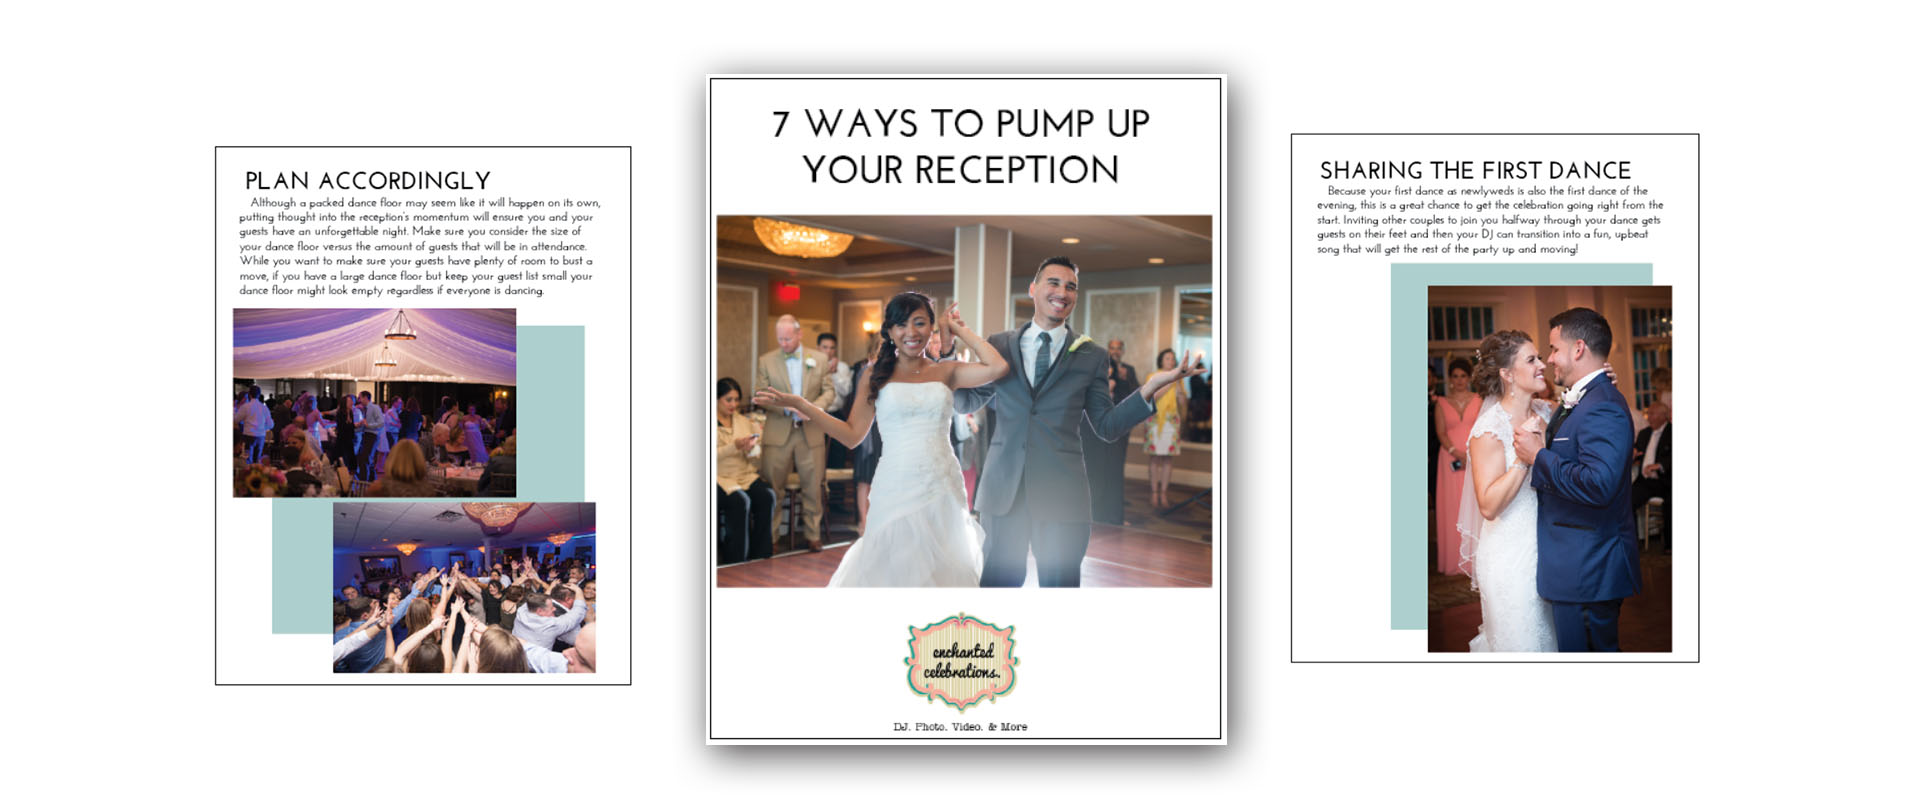 7 Ways to Pump Up Your Reception